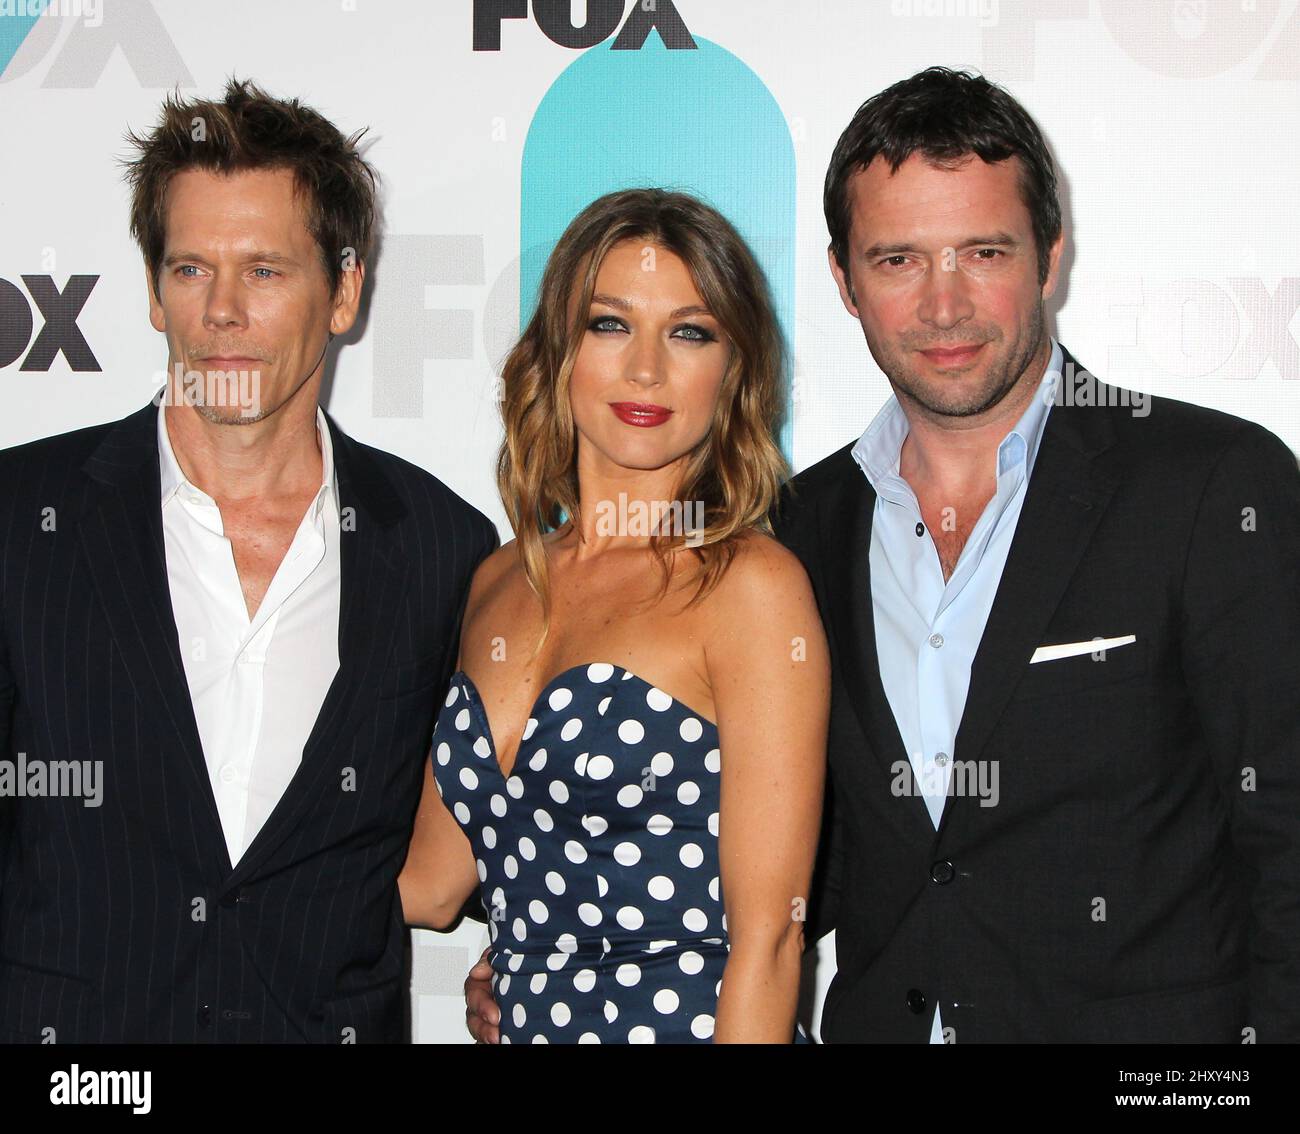 Kevin Bacon, Natalie Zea and James Purefoy attends the FOX 2012 Upfront presentation held at Wollman Rink in Central Park. Stock Photo